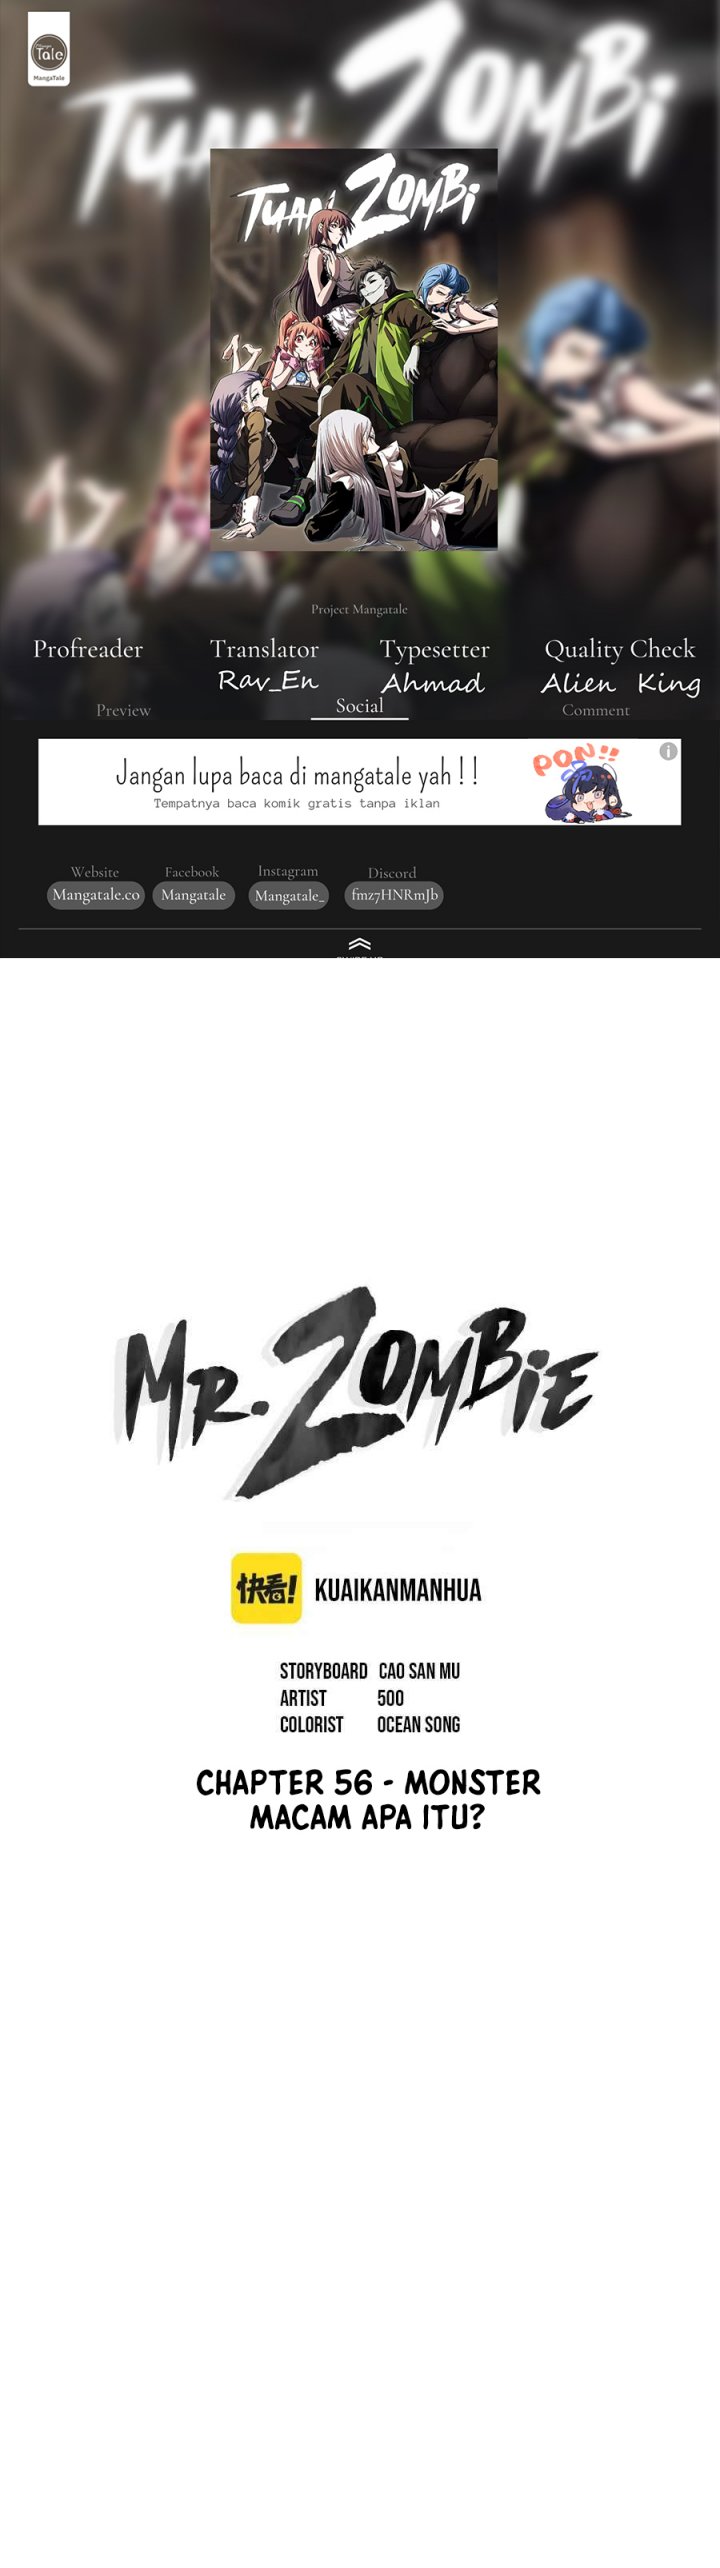 Mr. Zombie Chapter 56 Image 0